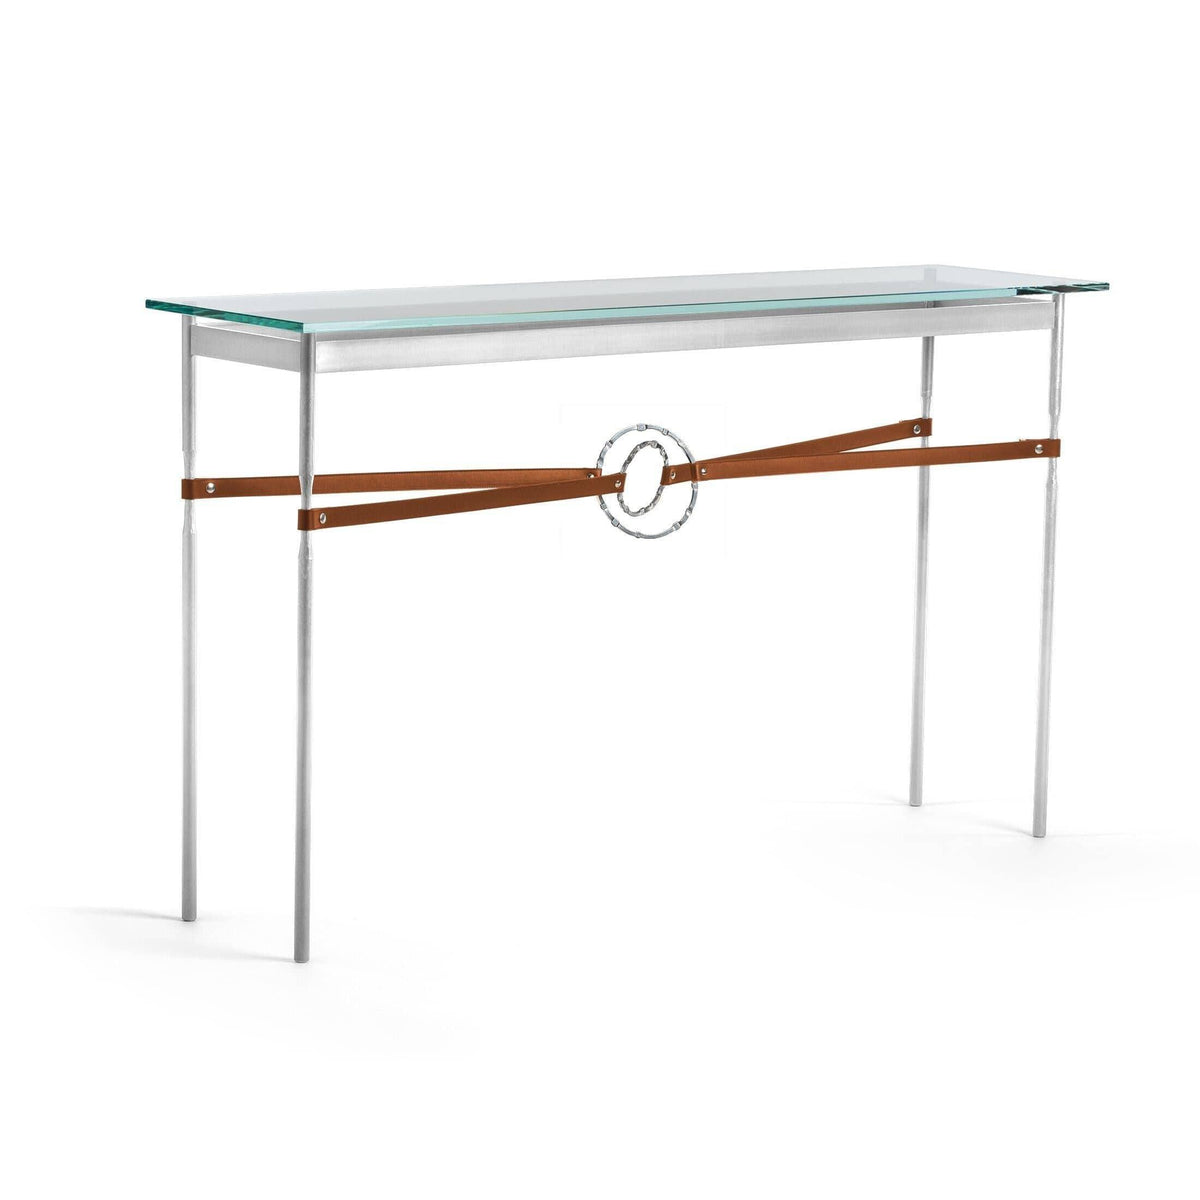 Hubbardton Forge - Equus Chestnut Leather Console Table - 750118-85-85-LC-VA0714 | Montreal Lighting & Hardware